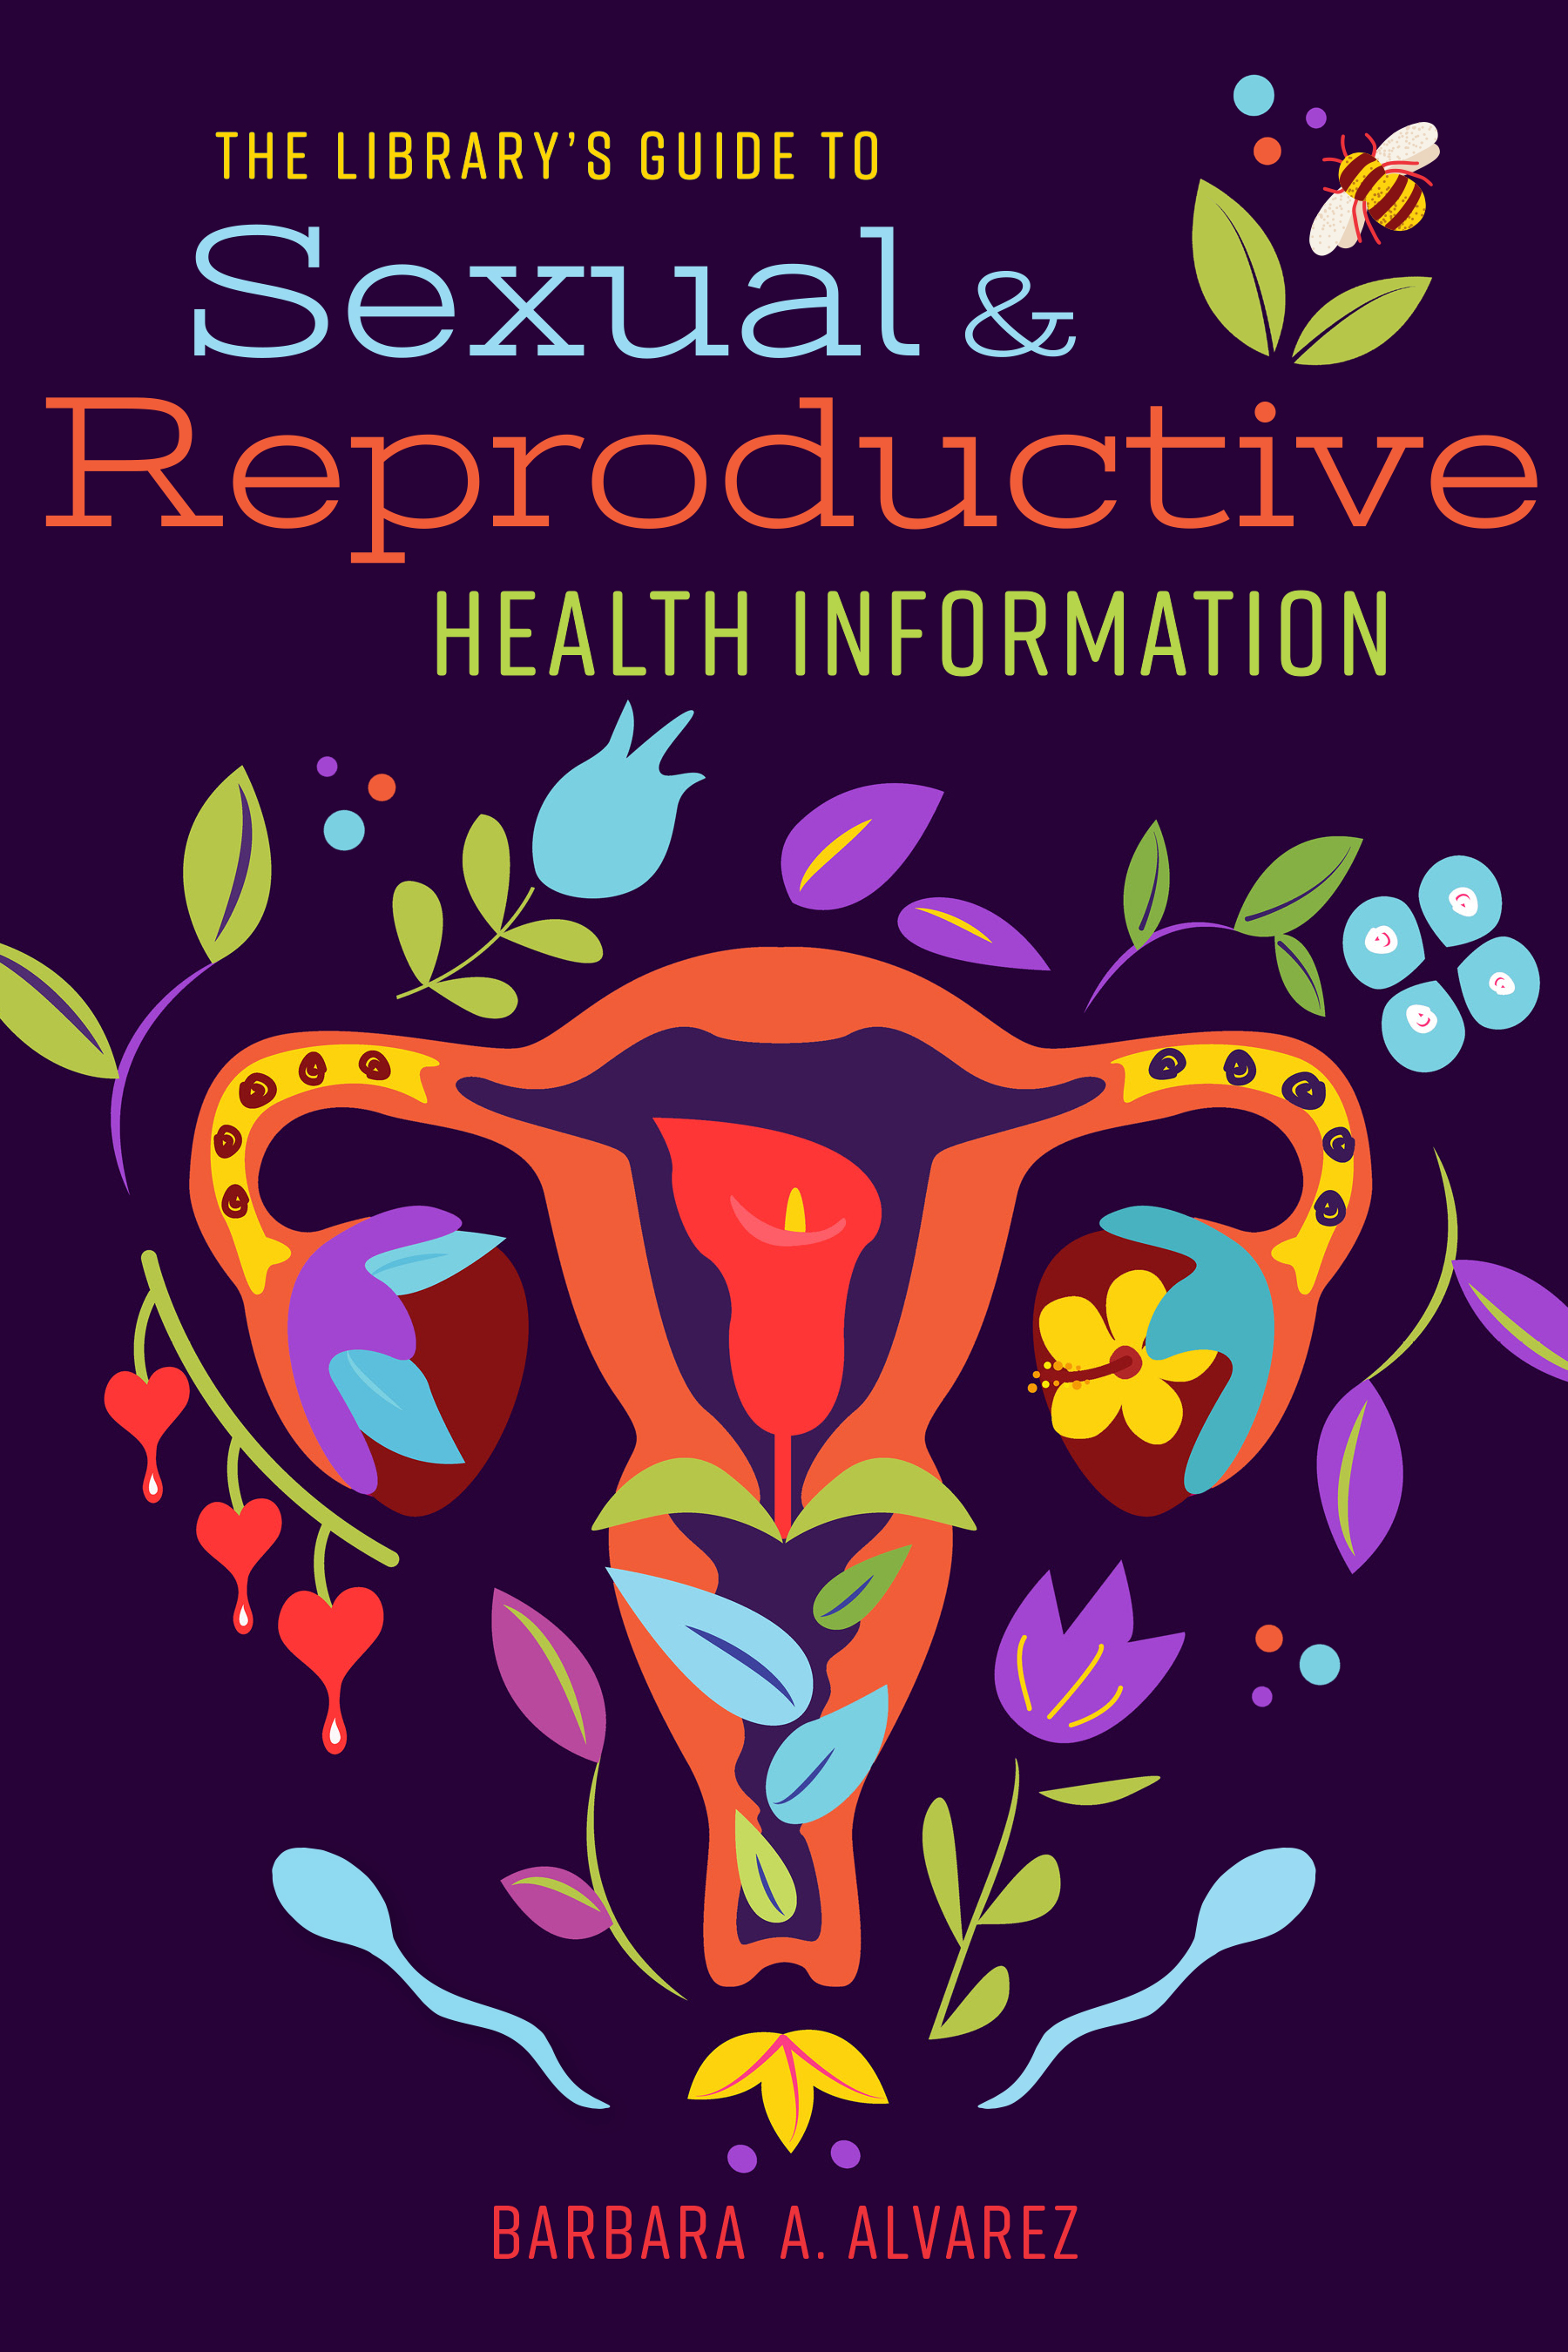 book cover for The Library's Guide to Sexual and Reproductive Health Information